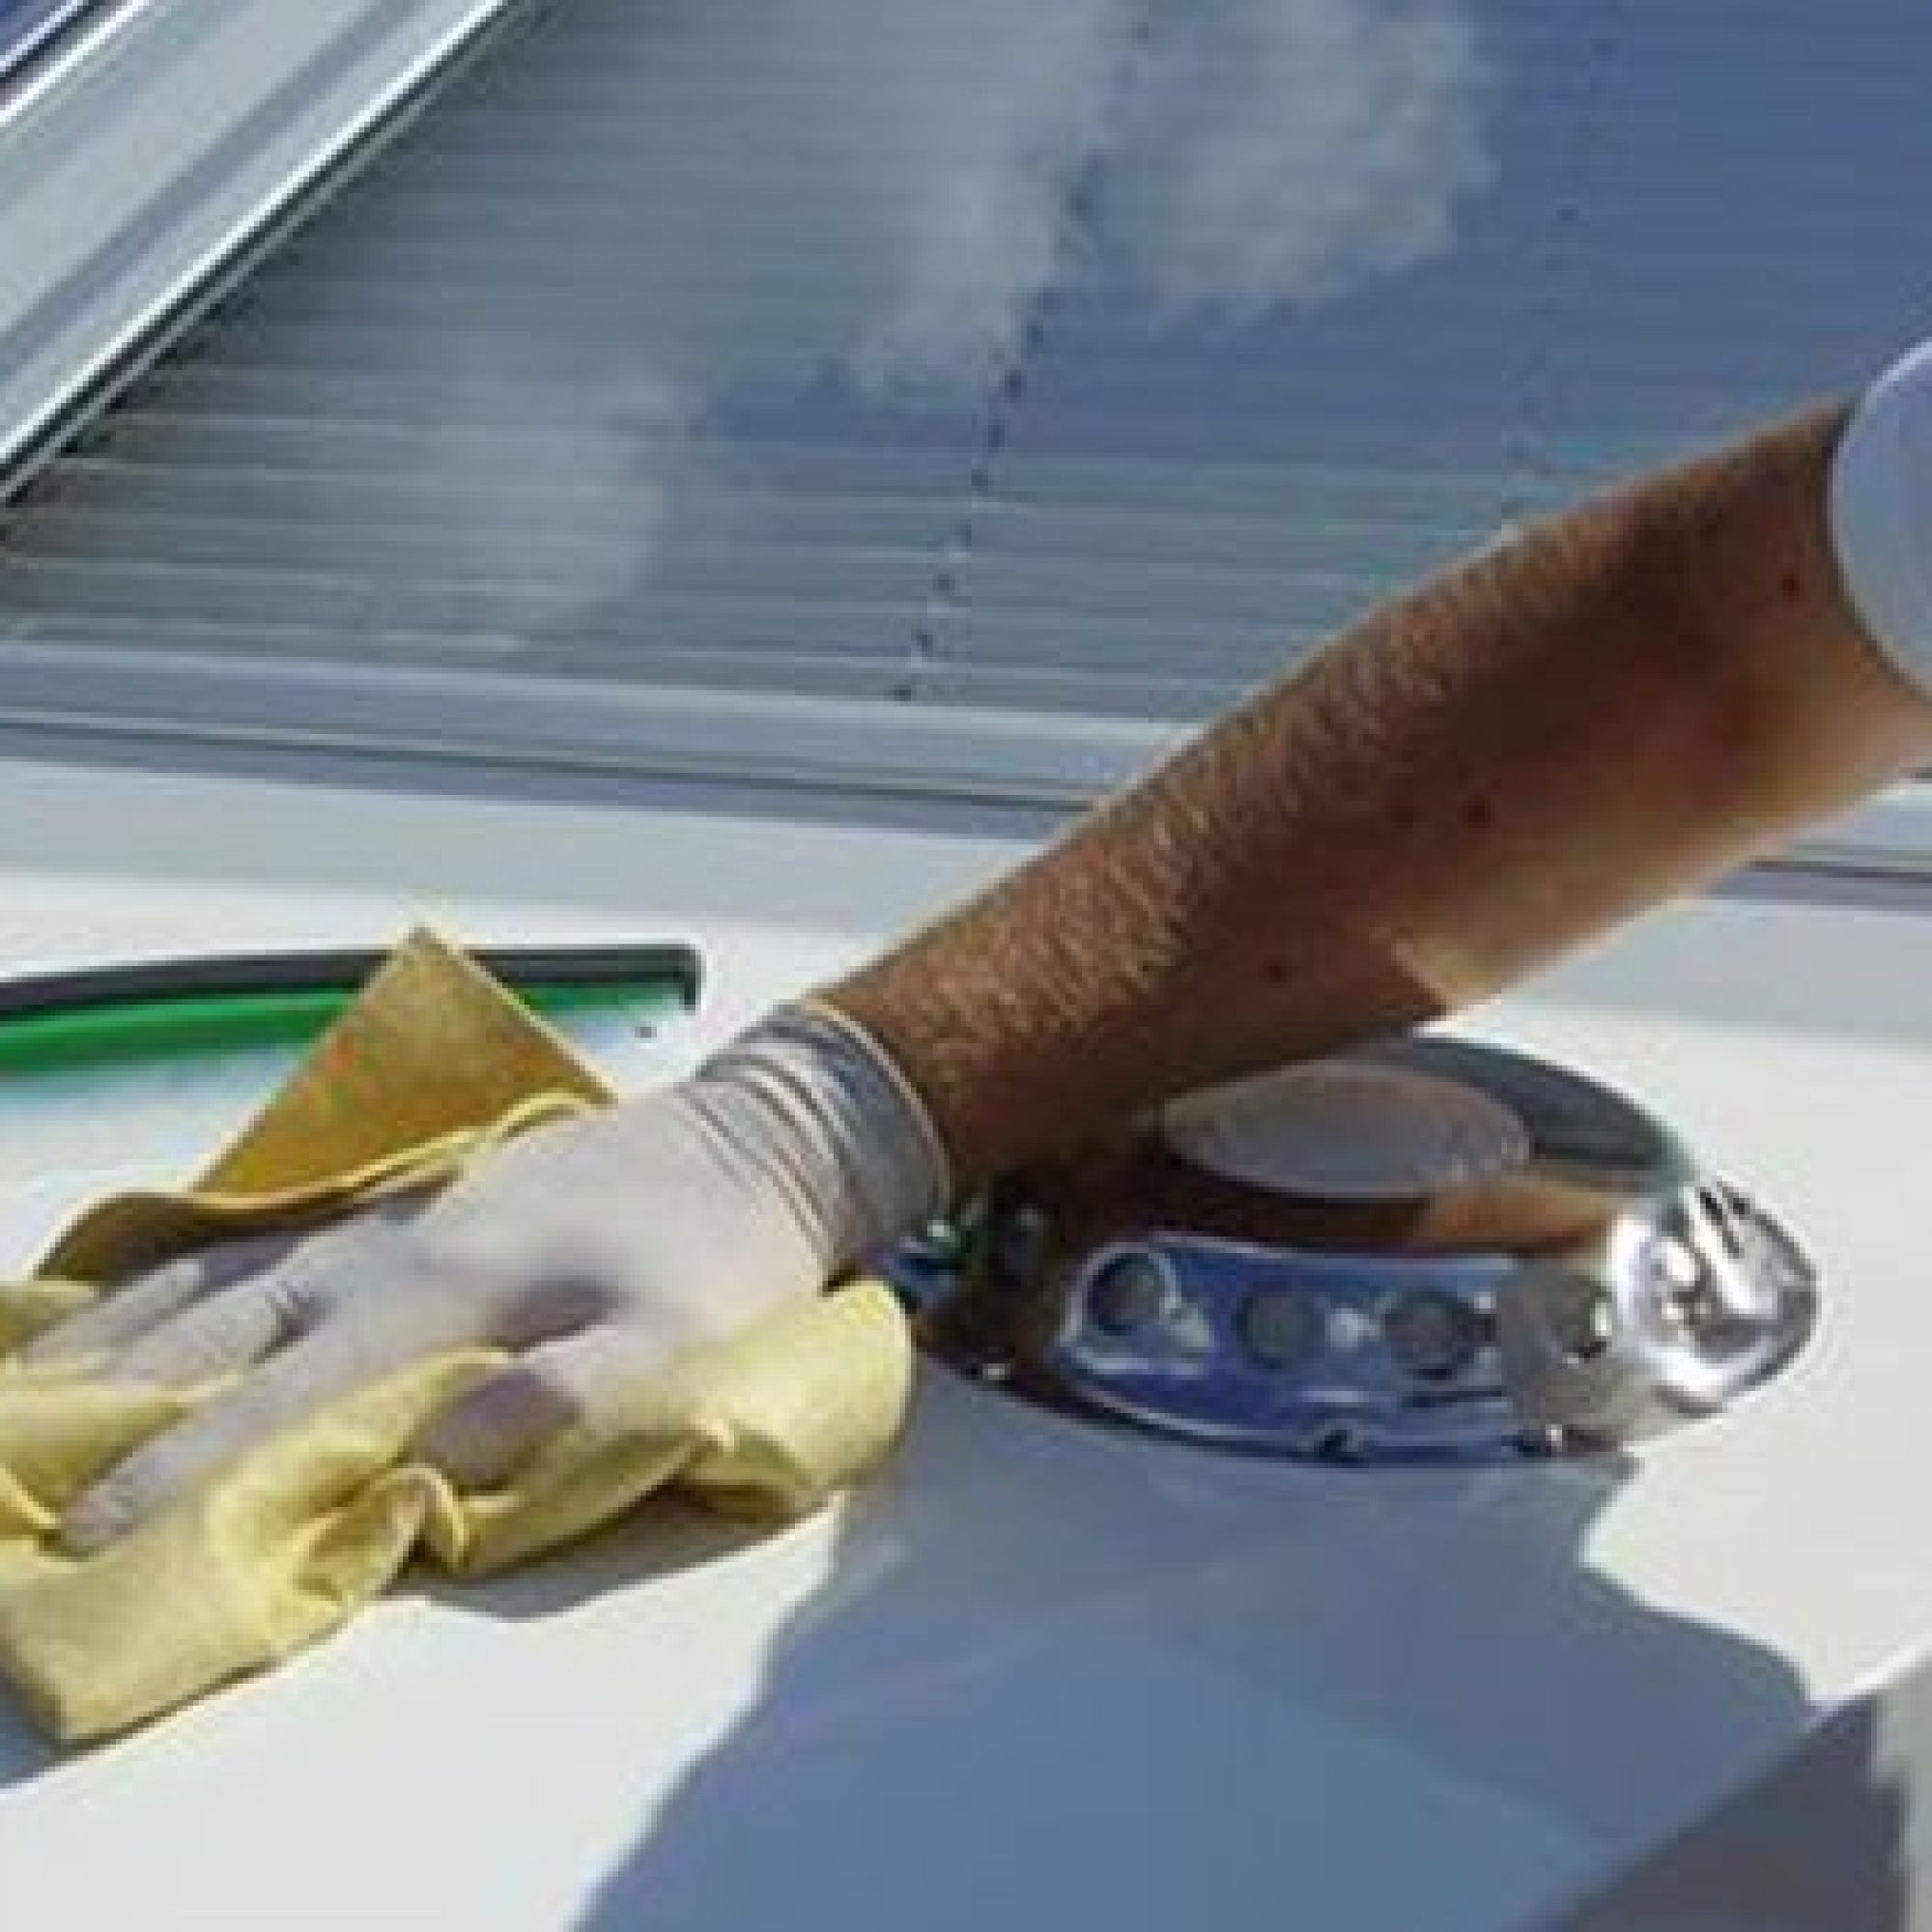 cleaning-boat-590x350